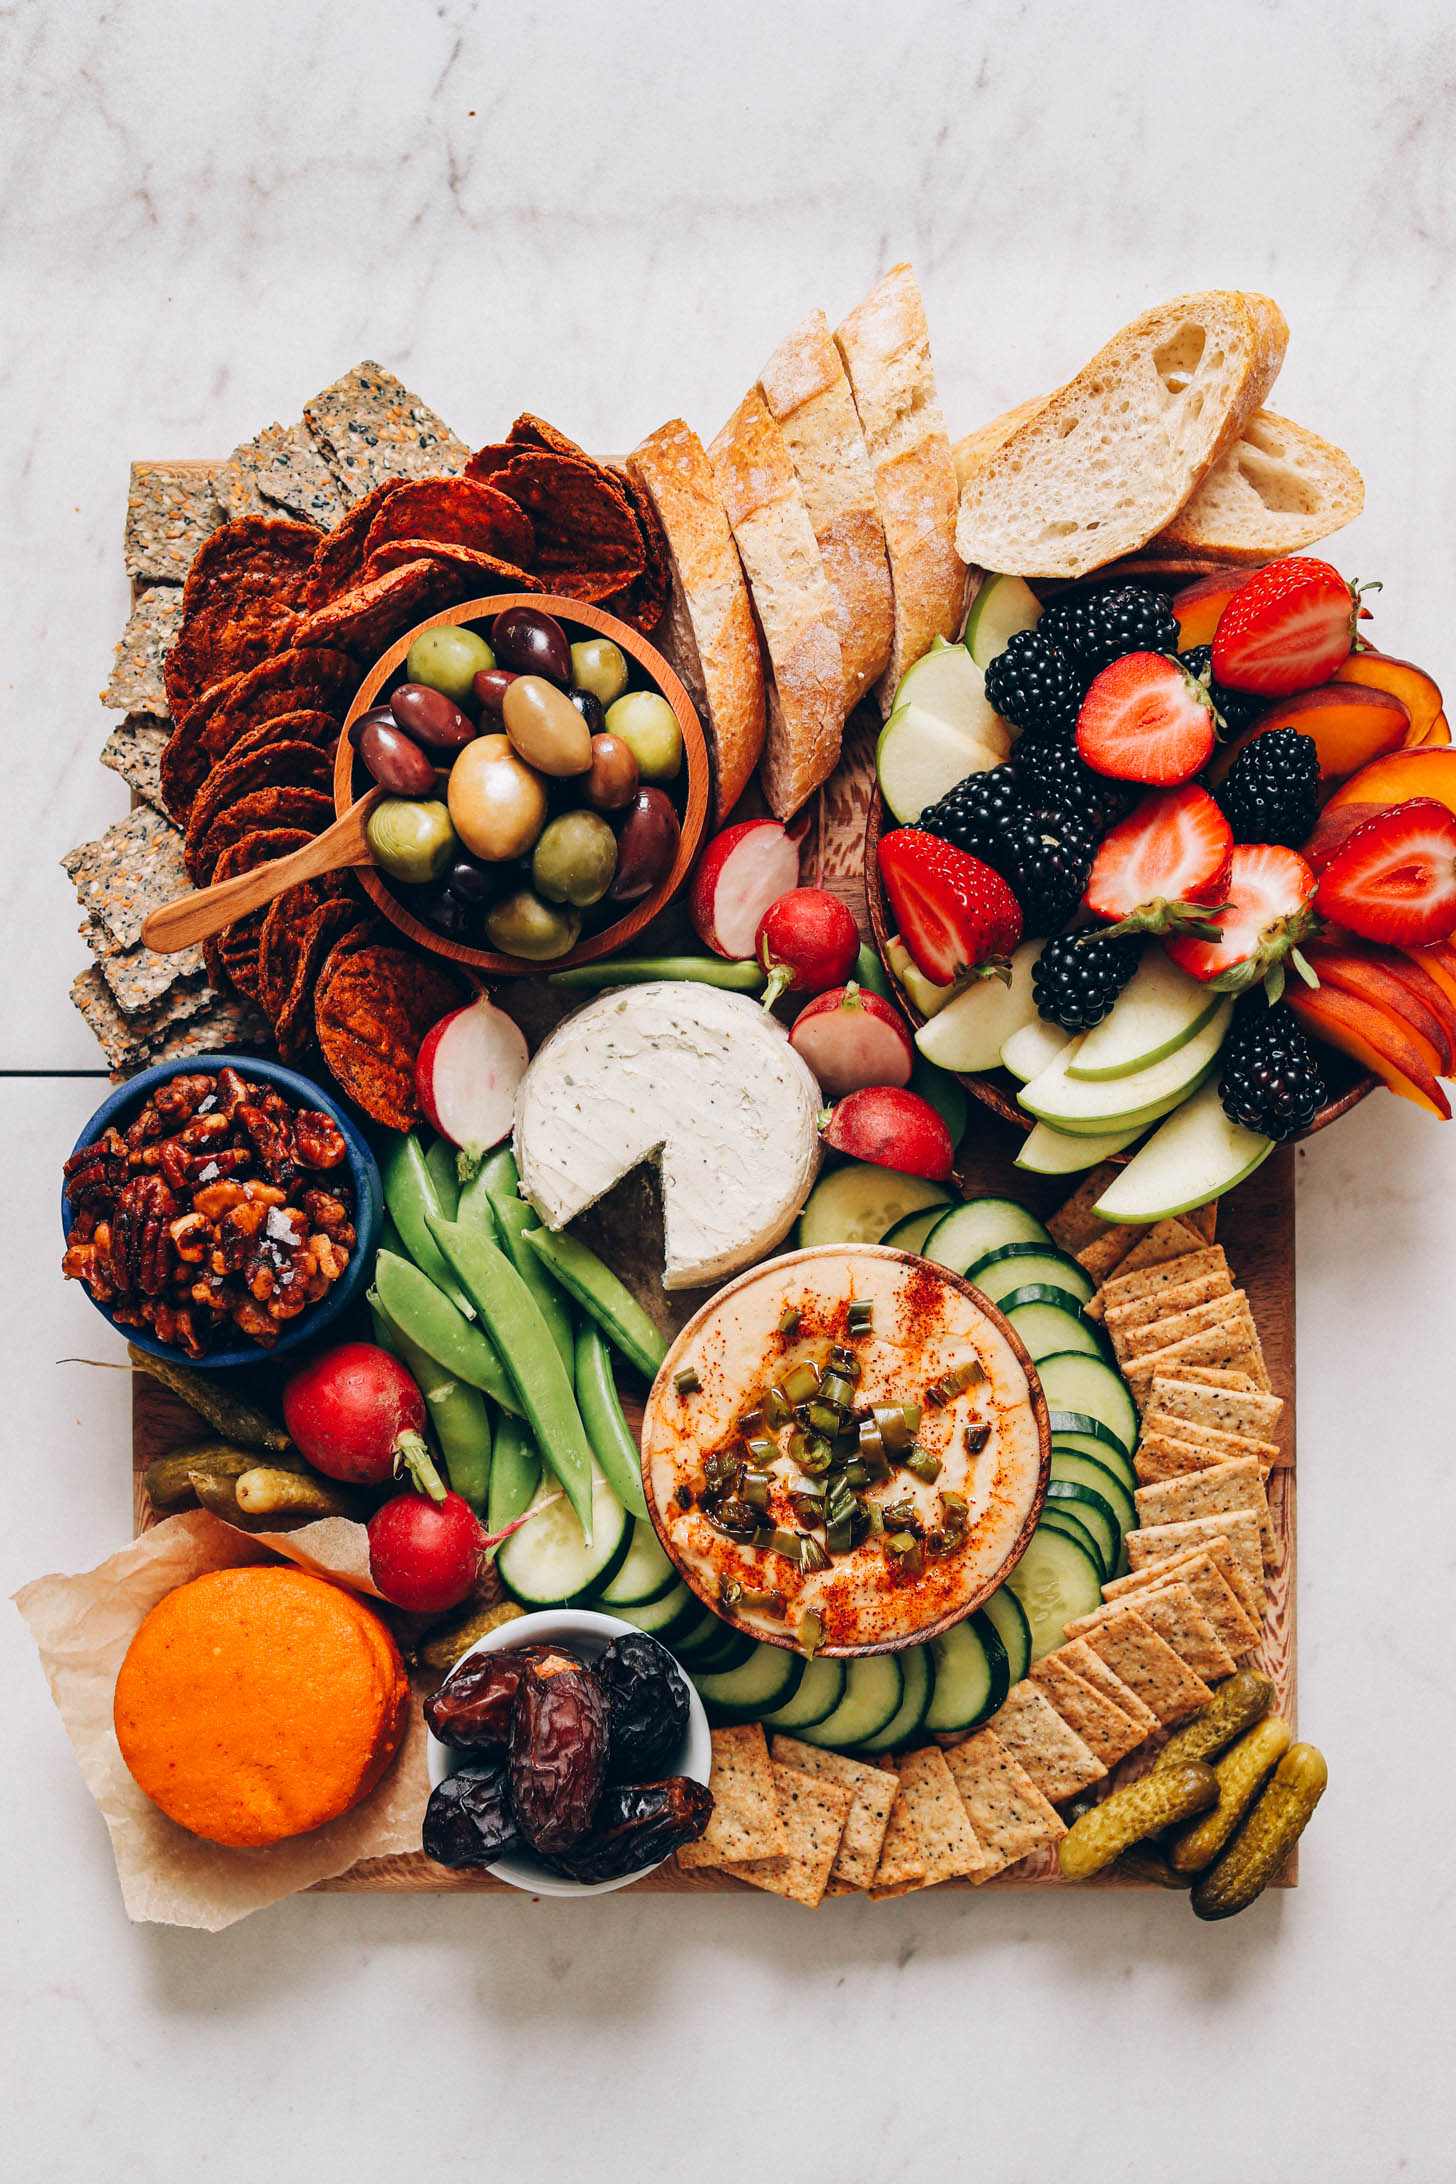 Abundant vegan charcuterie platter with fruit, nuts, crackers, veggies, dips, and more